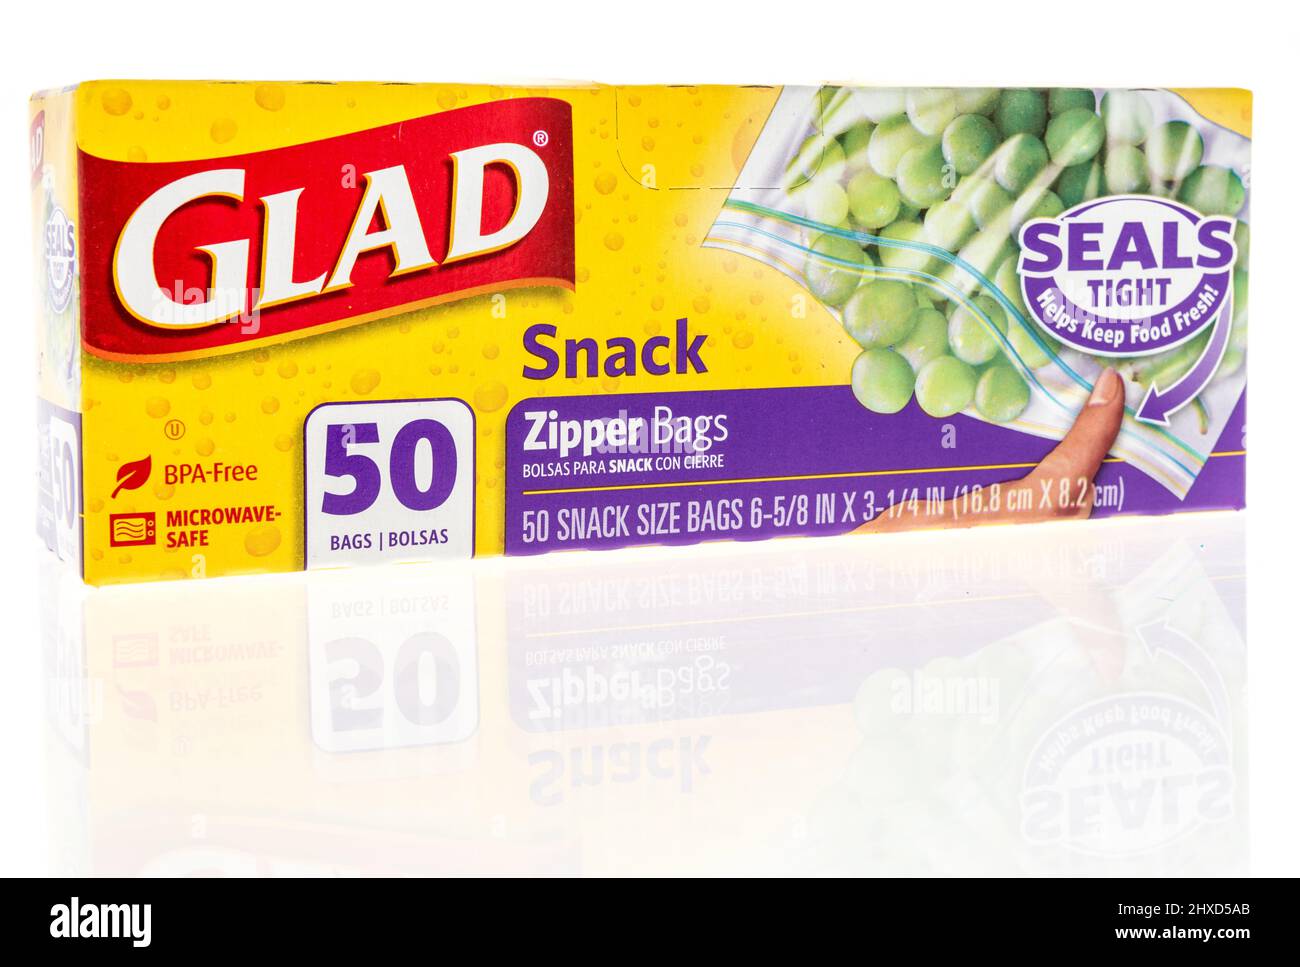 https://c8.alamy.com/comp/2HXD5AB/winneconne-wi-6-march-2021-a-package-of-glad-snack-plastic-zipper-bags-on-an-isolated-background-2HXD5AB.jpg